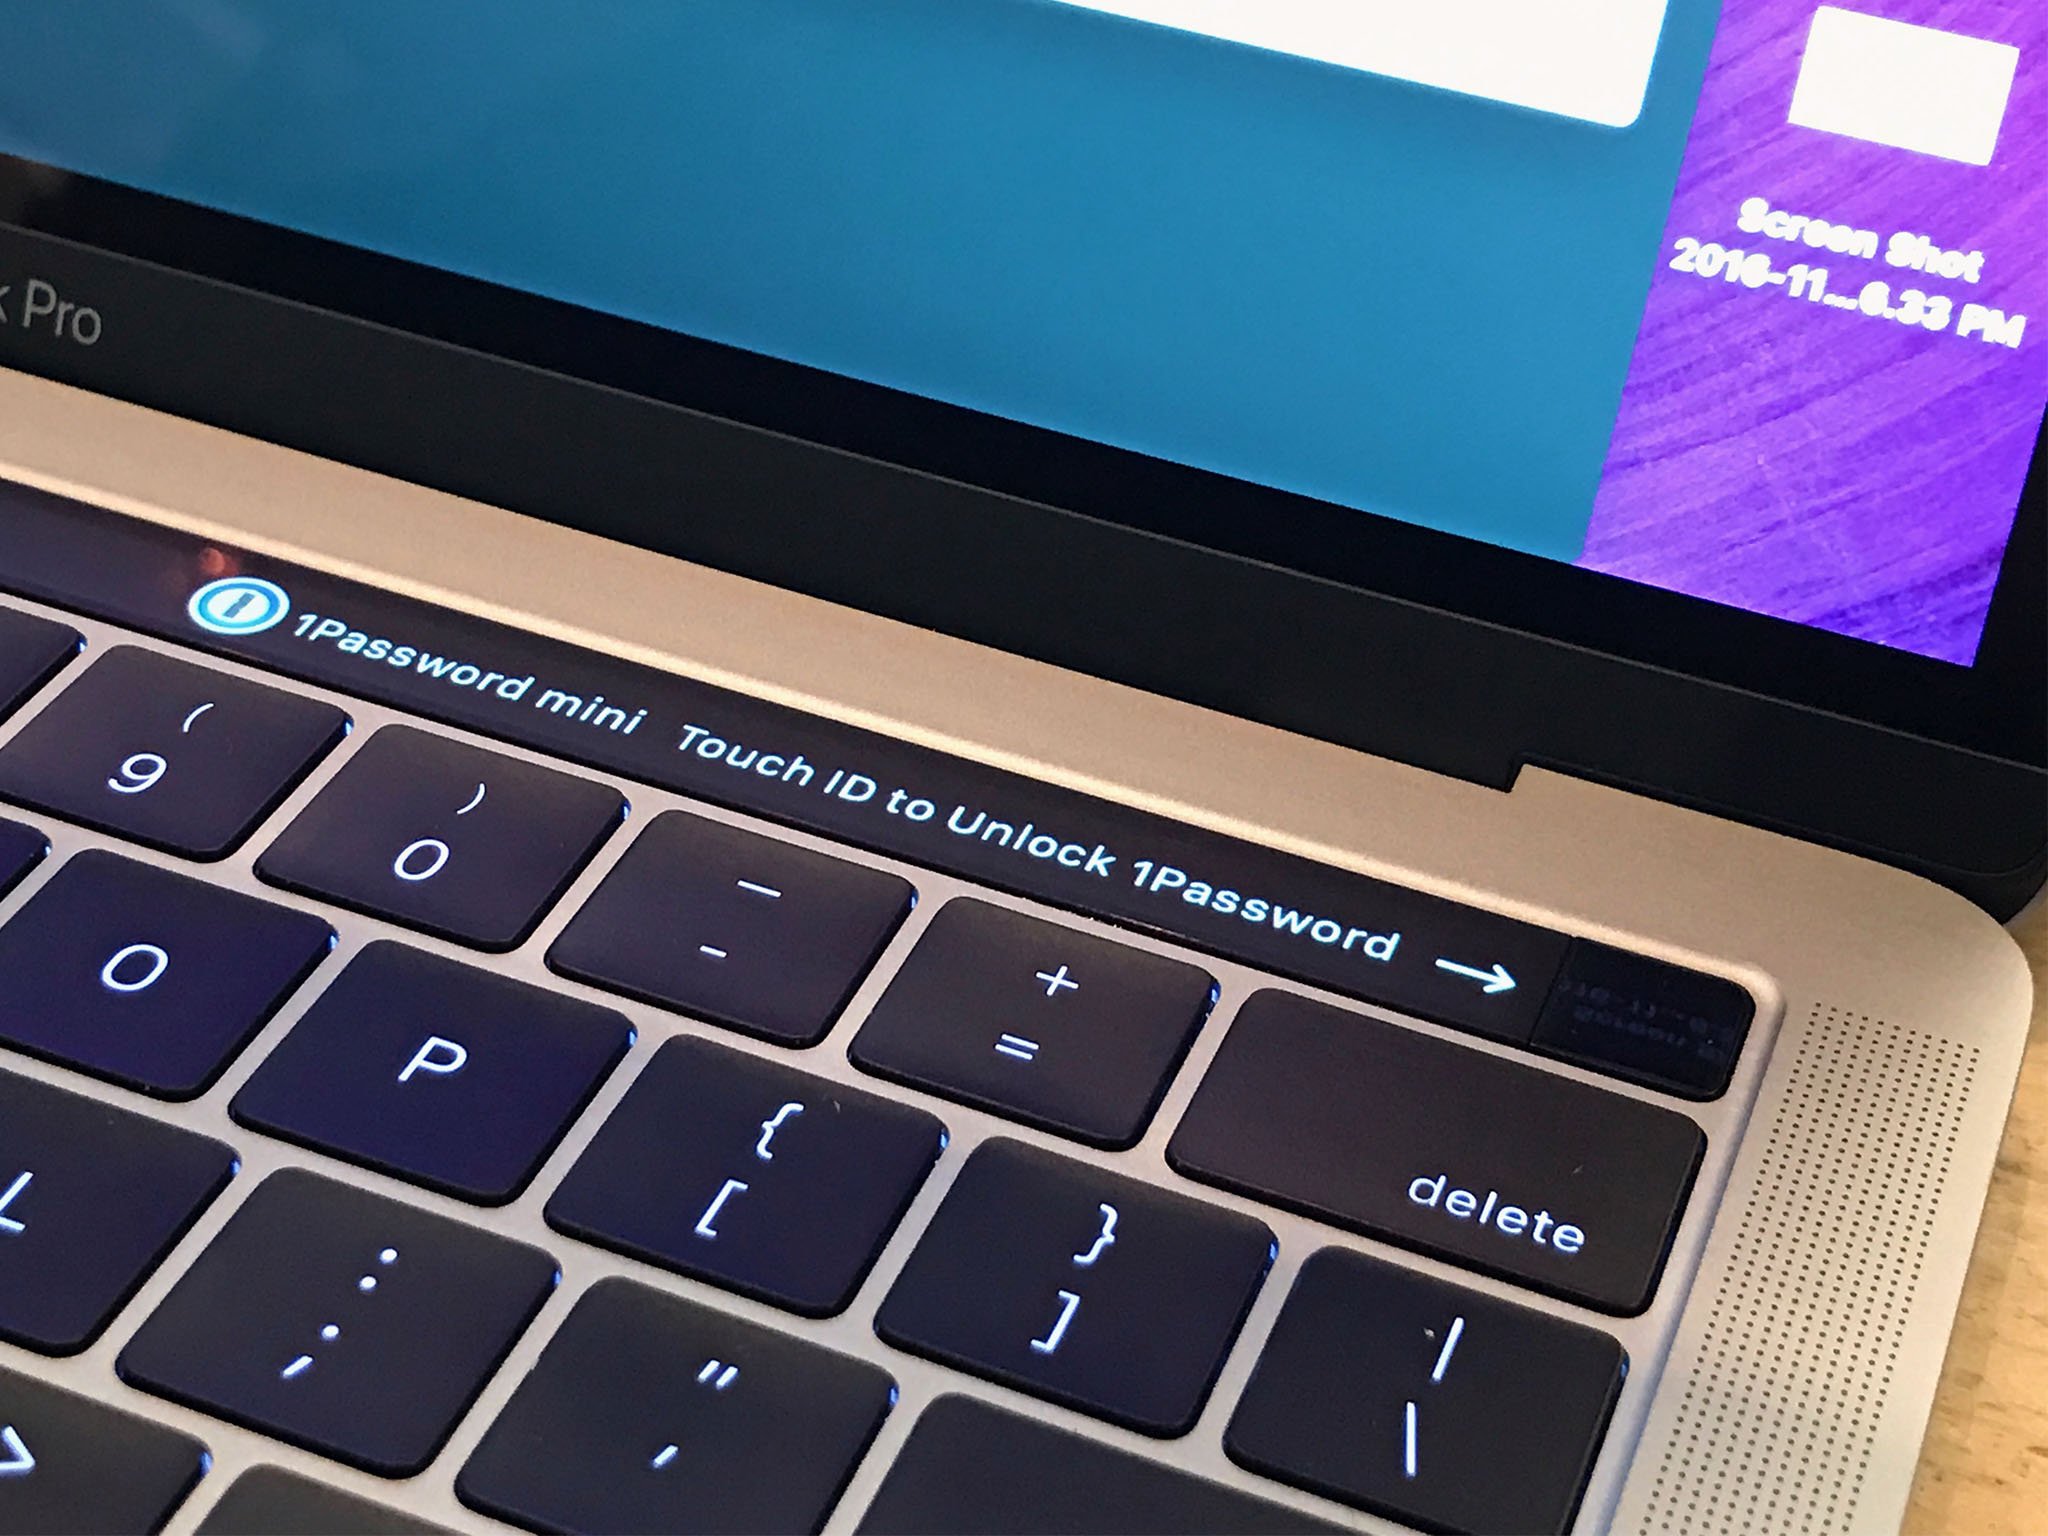 Use Touch ID to unlock 1Password on MacBook Pro Touch Bar